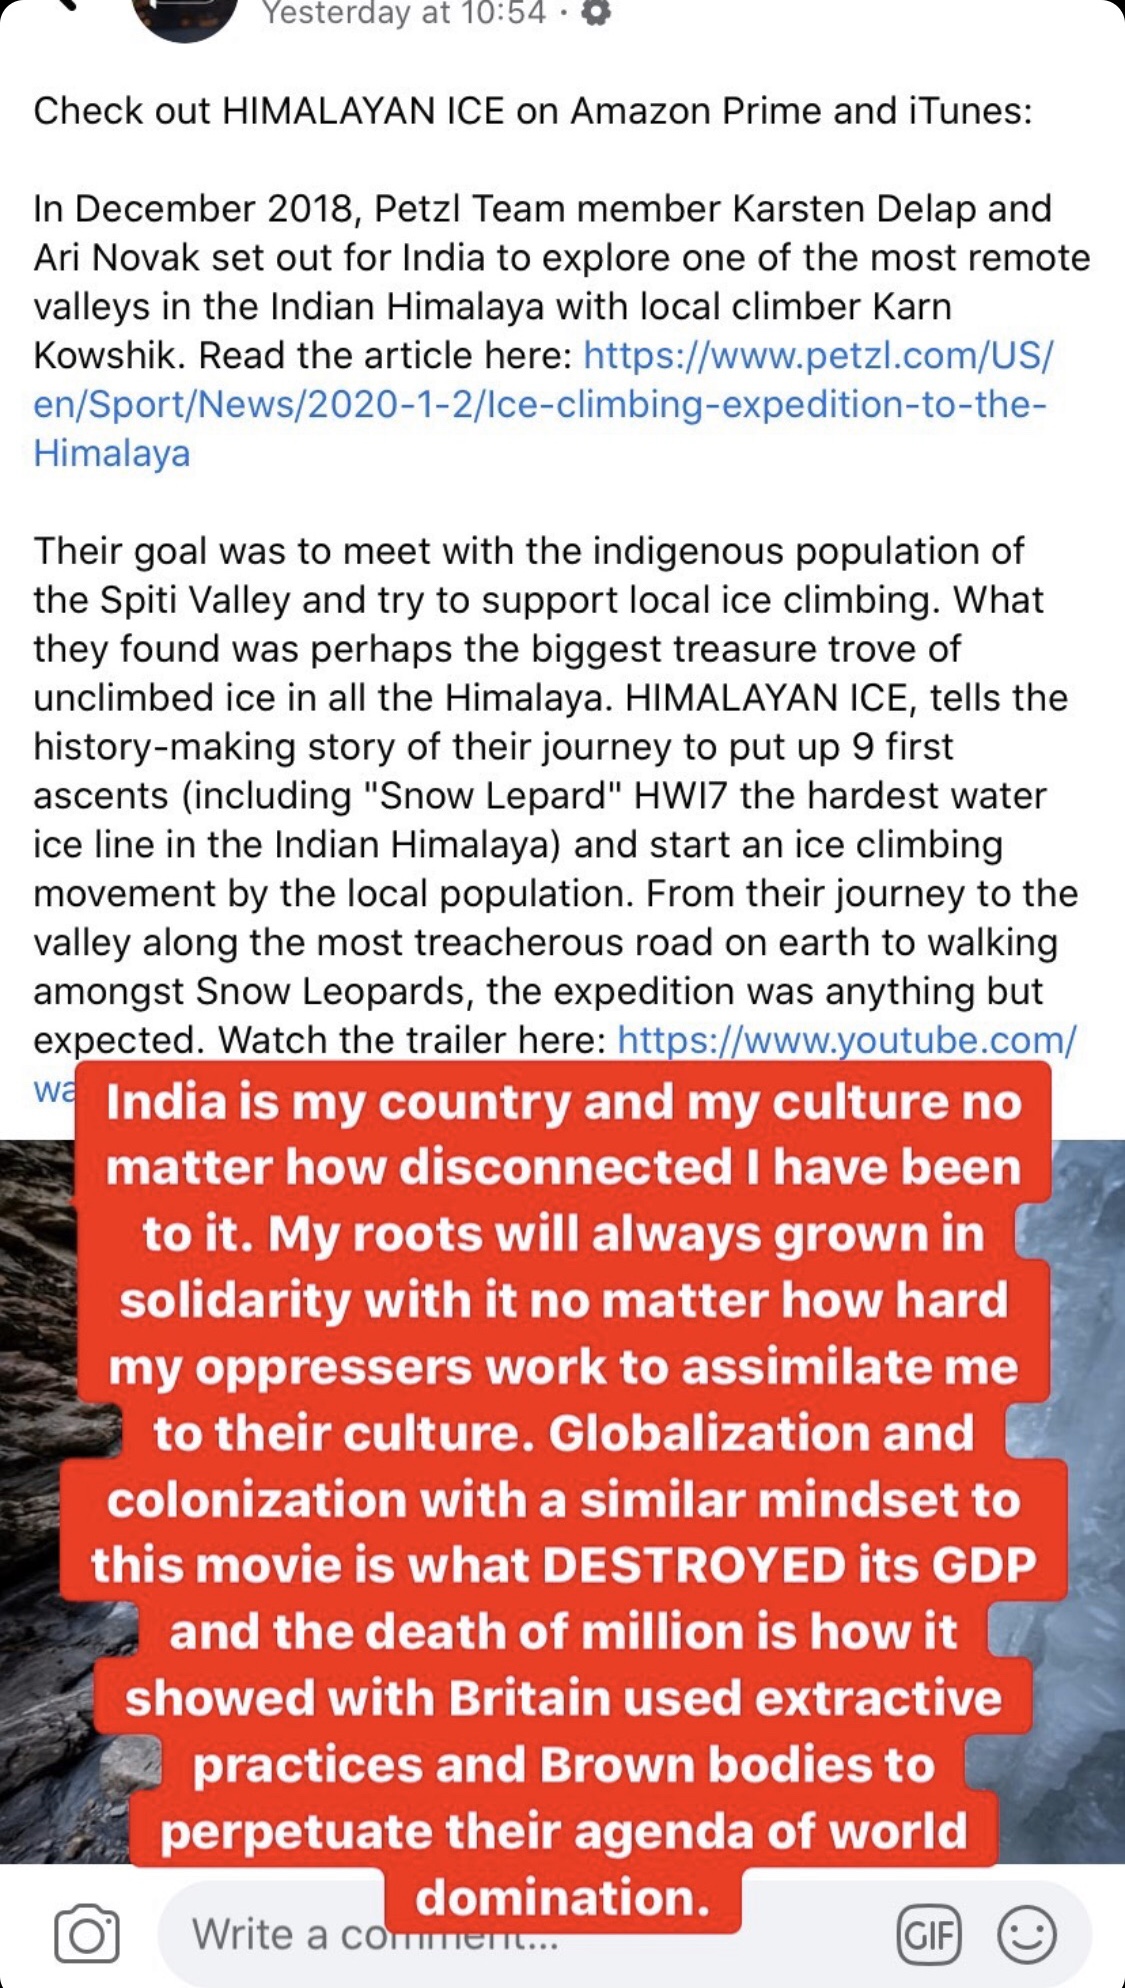 "India is my country and my culture no matter how disconnected I have been to it. My roots will always grow in solidarity with it no matter how hard my oppressors work to assimilate me in their culture. Globalization and colonization with a similar mindset to this movie is what DESTROYED its GDP and the death of millions is how it showed with Brain used extractive practices and Brown bodies to perpetuate their agenda of world domination”.  